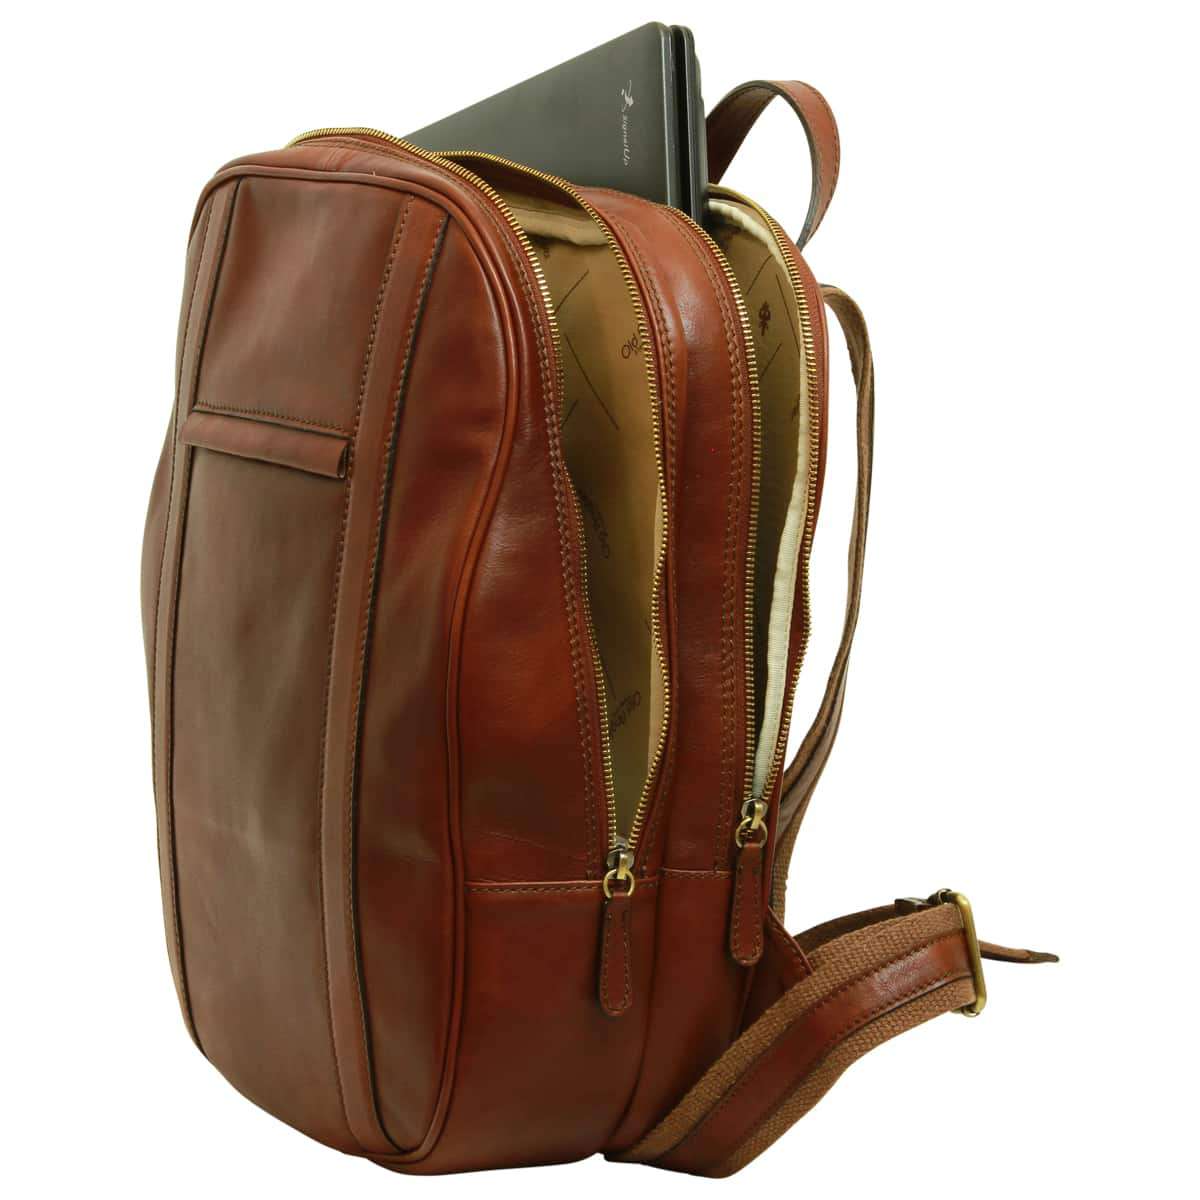 Soft Calfskin Leather Laptop Backpack - Brown | 031491MA | EURO | Old Angler Firenze